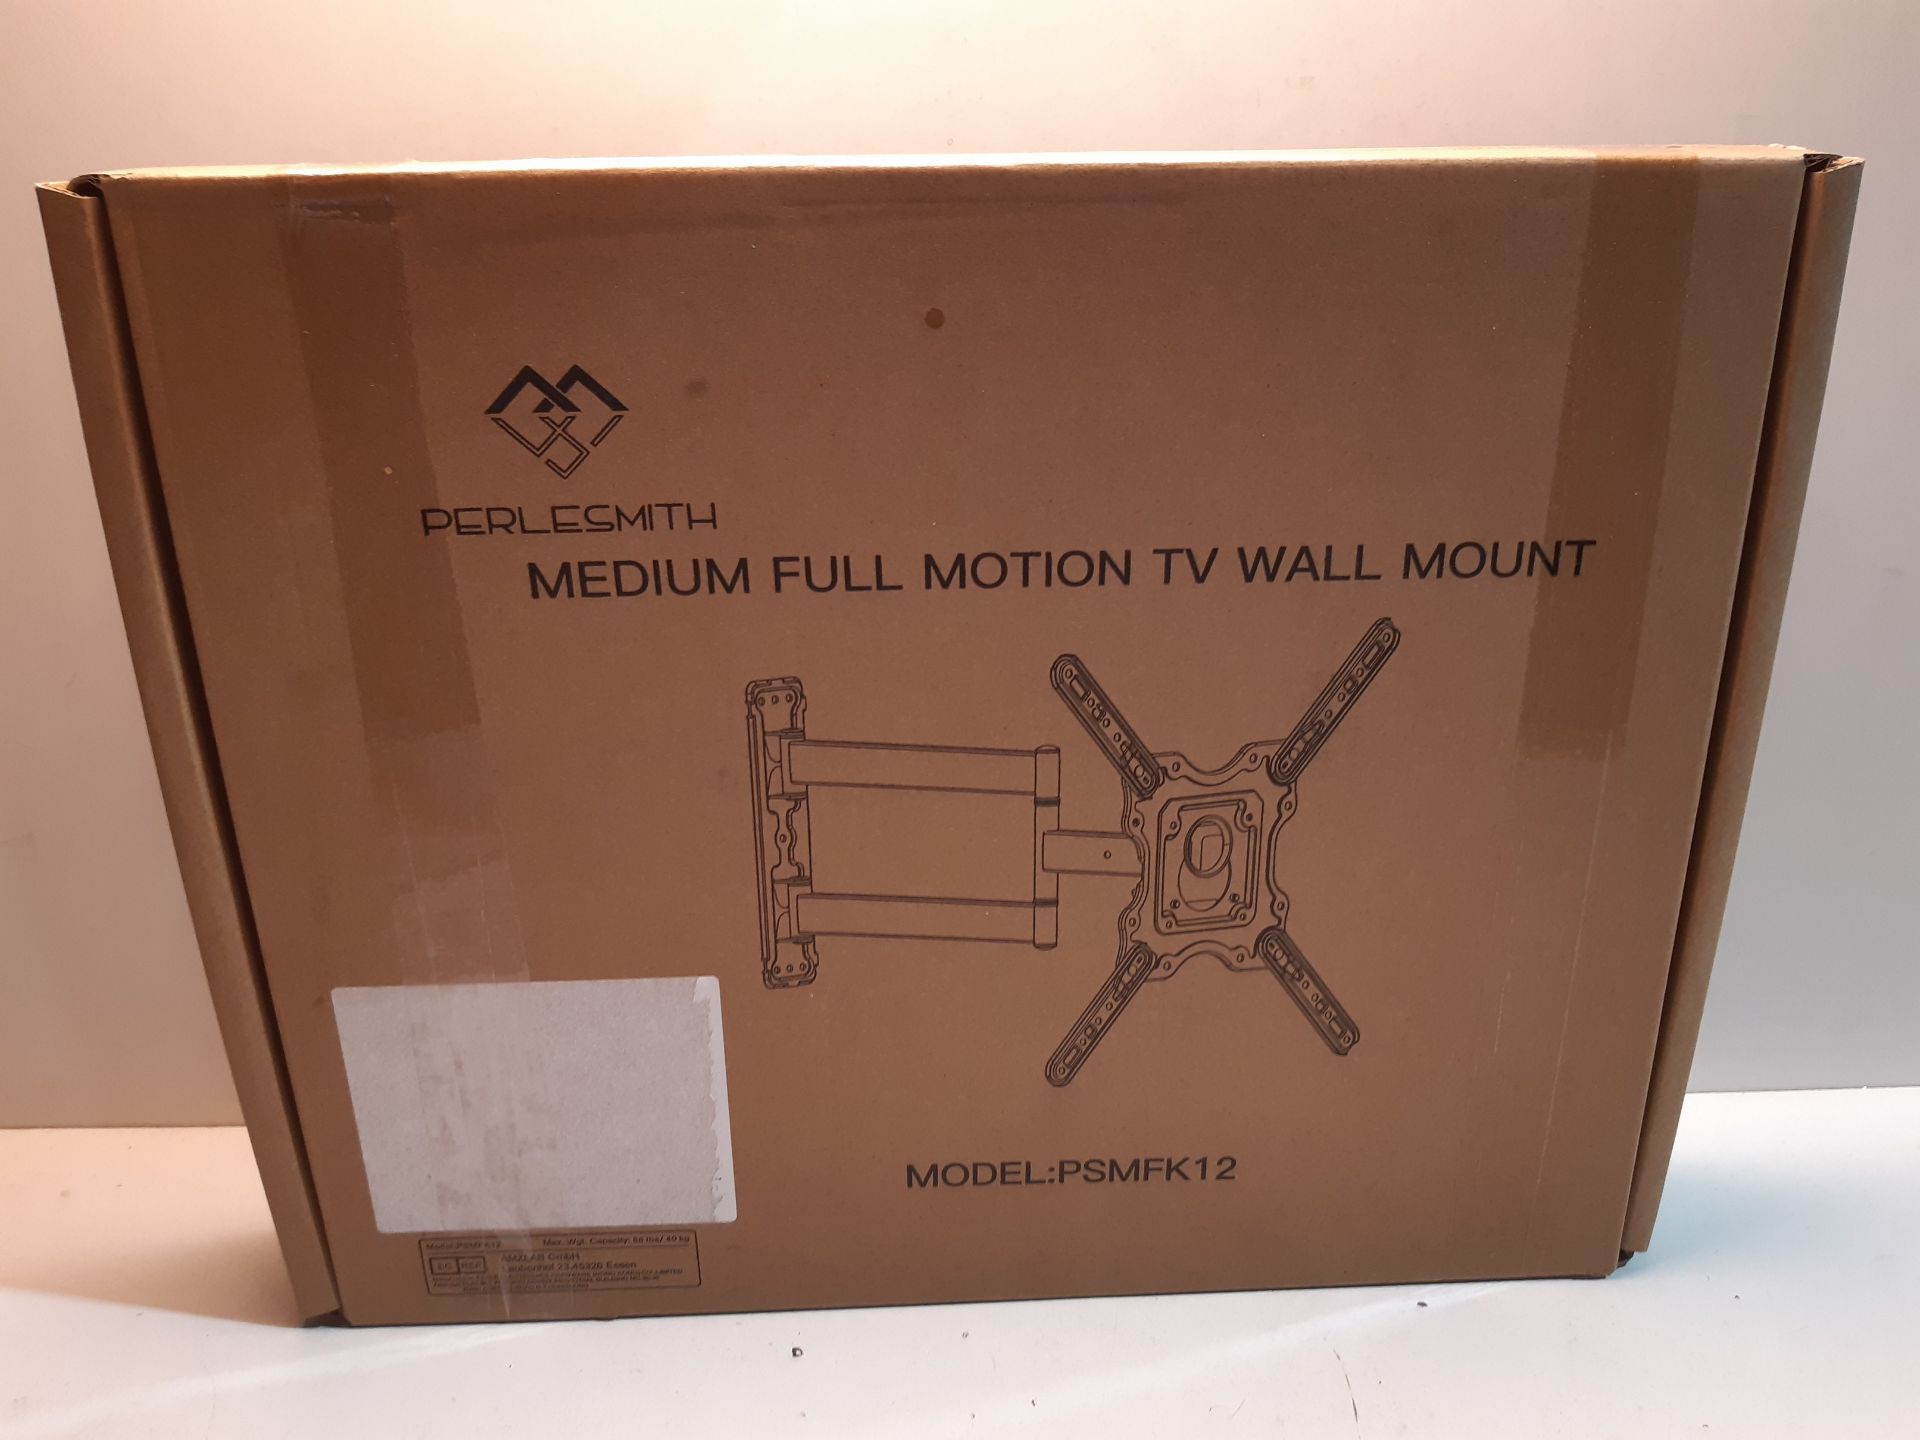 RRP £19.64 TV Wall Mount - Image 2 of 2